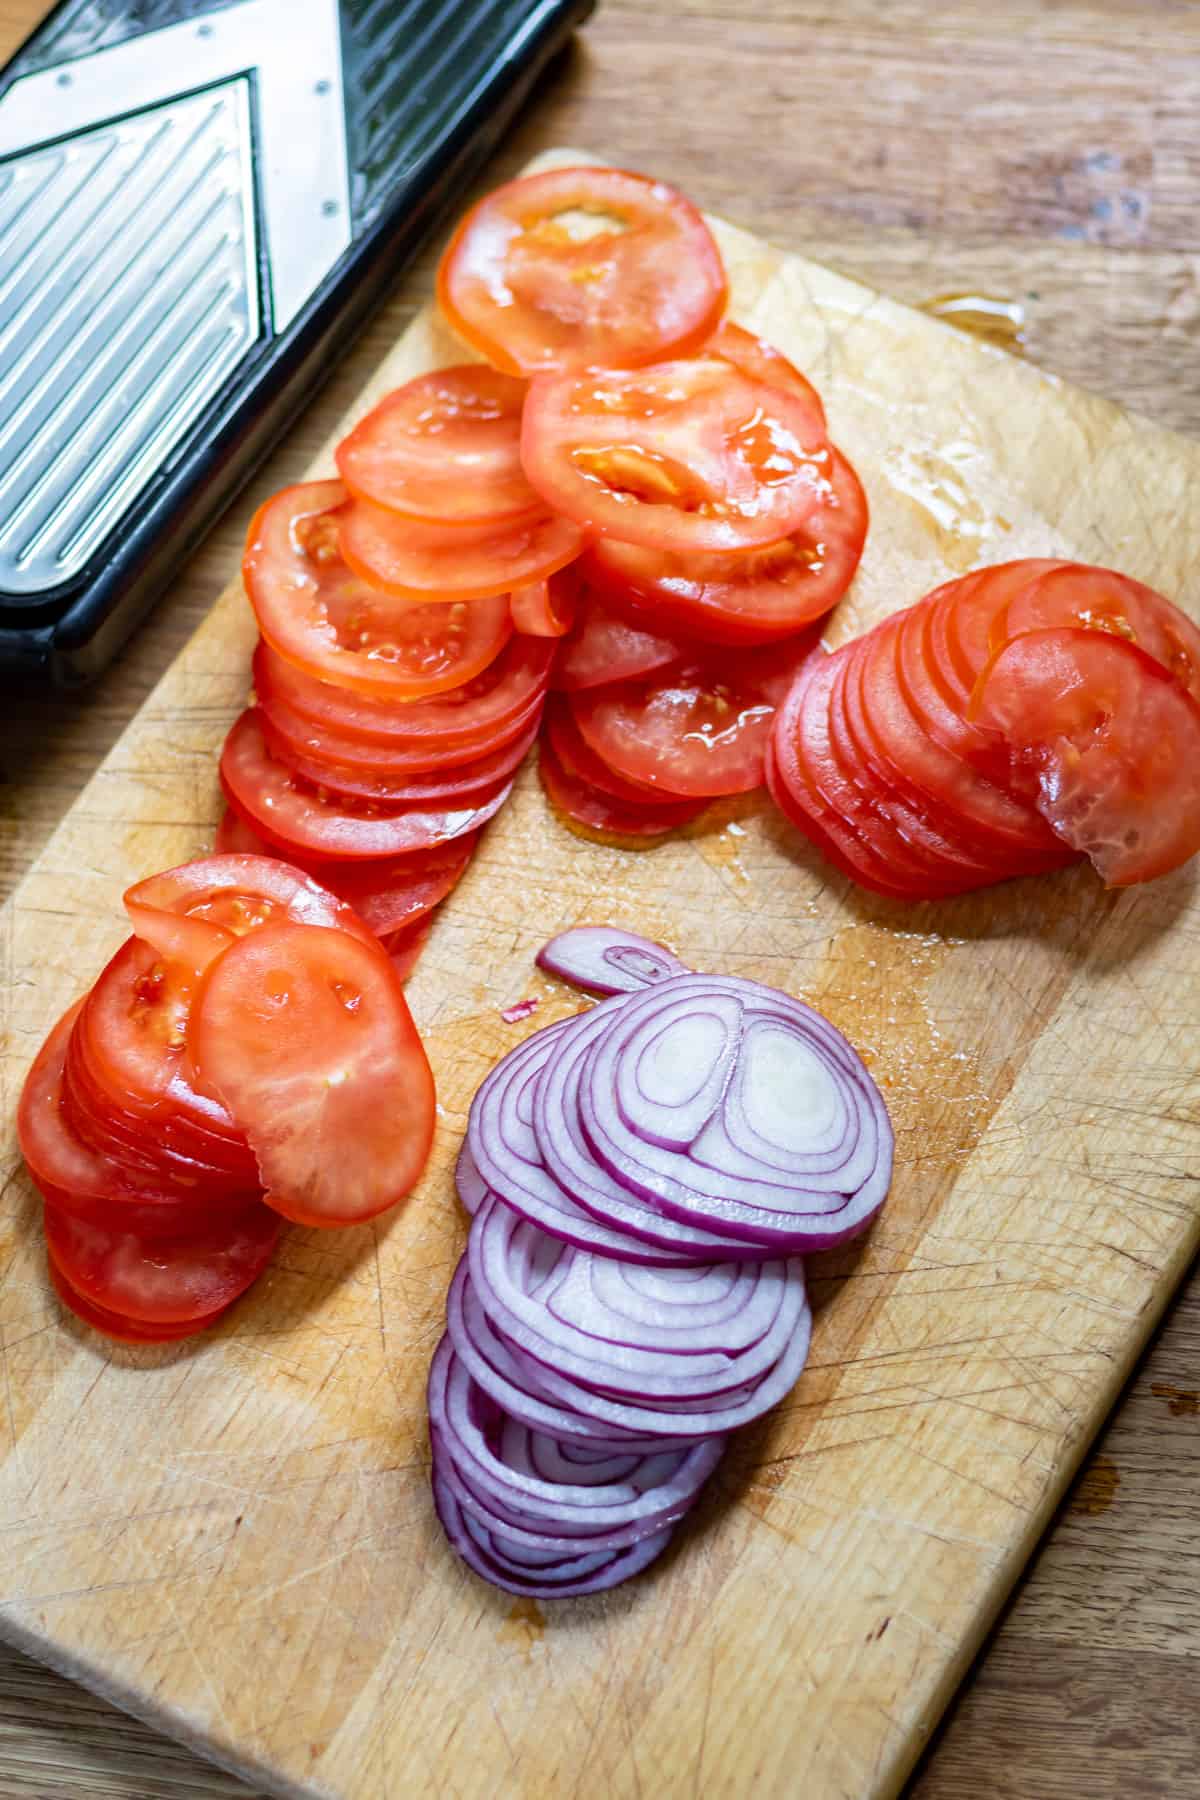 Slicing tomatoes and onions.